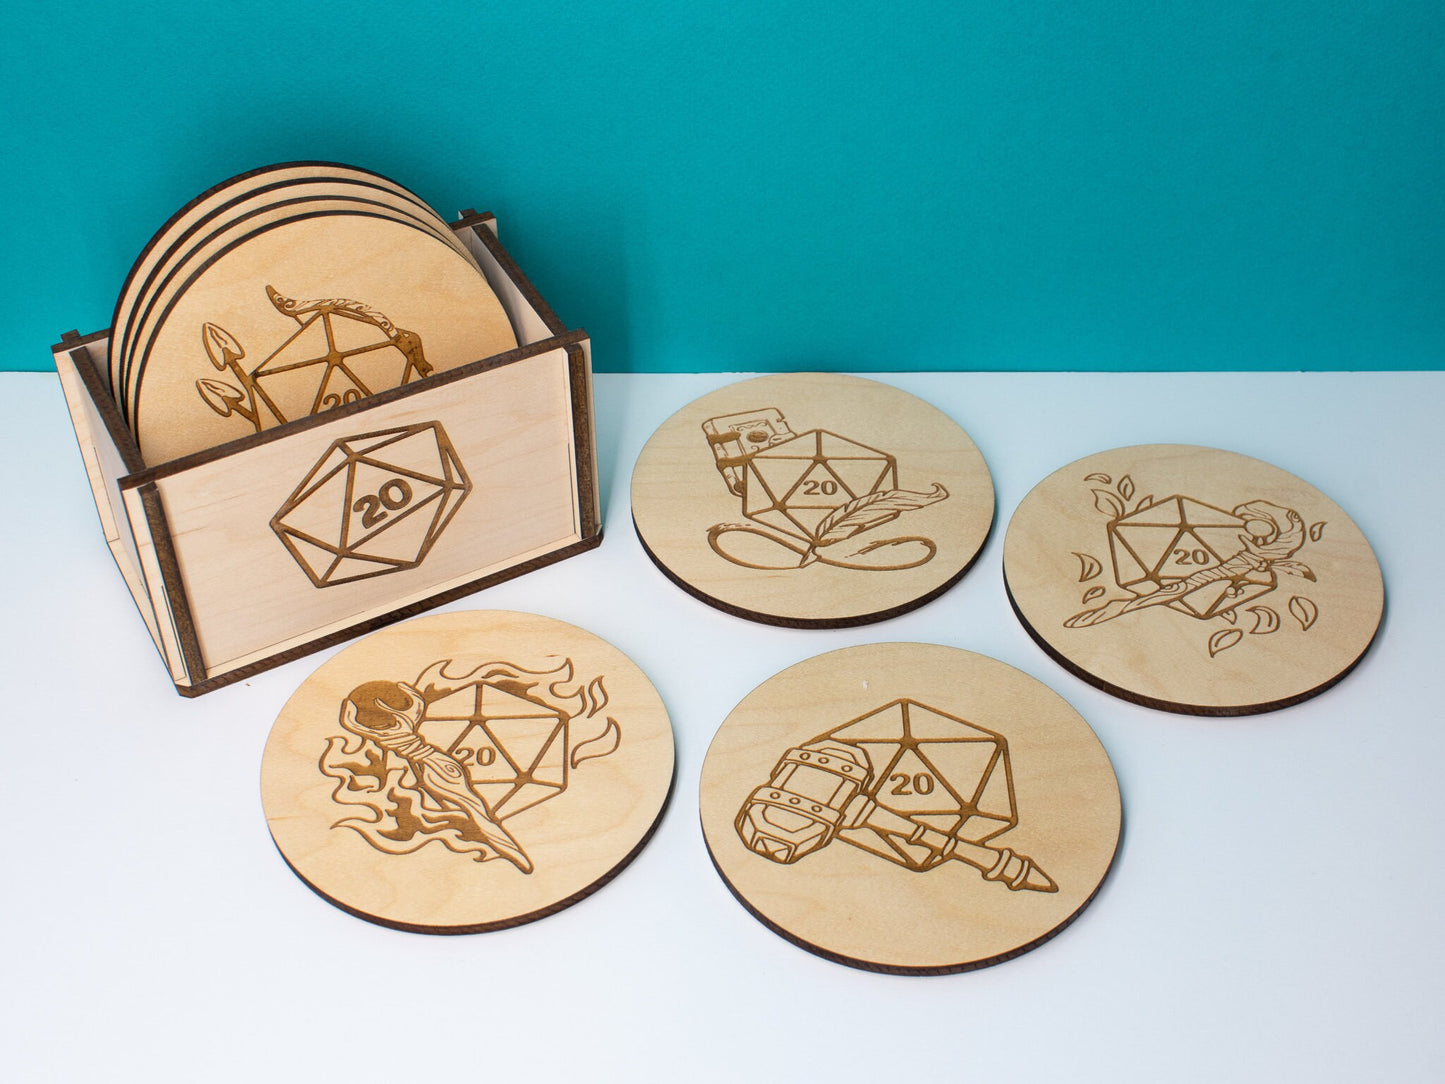 D&D Coasters, Set of 8, DnD Gift for Dungeon Master or Player, Dungeons and Dragons, DM Gifts, DnD Gifts, RPG Game Accessories, D20 Dice